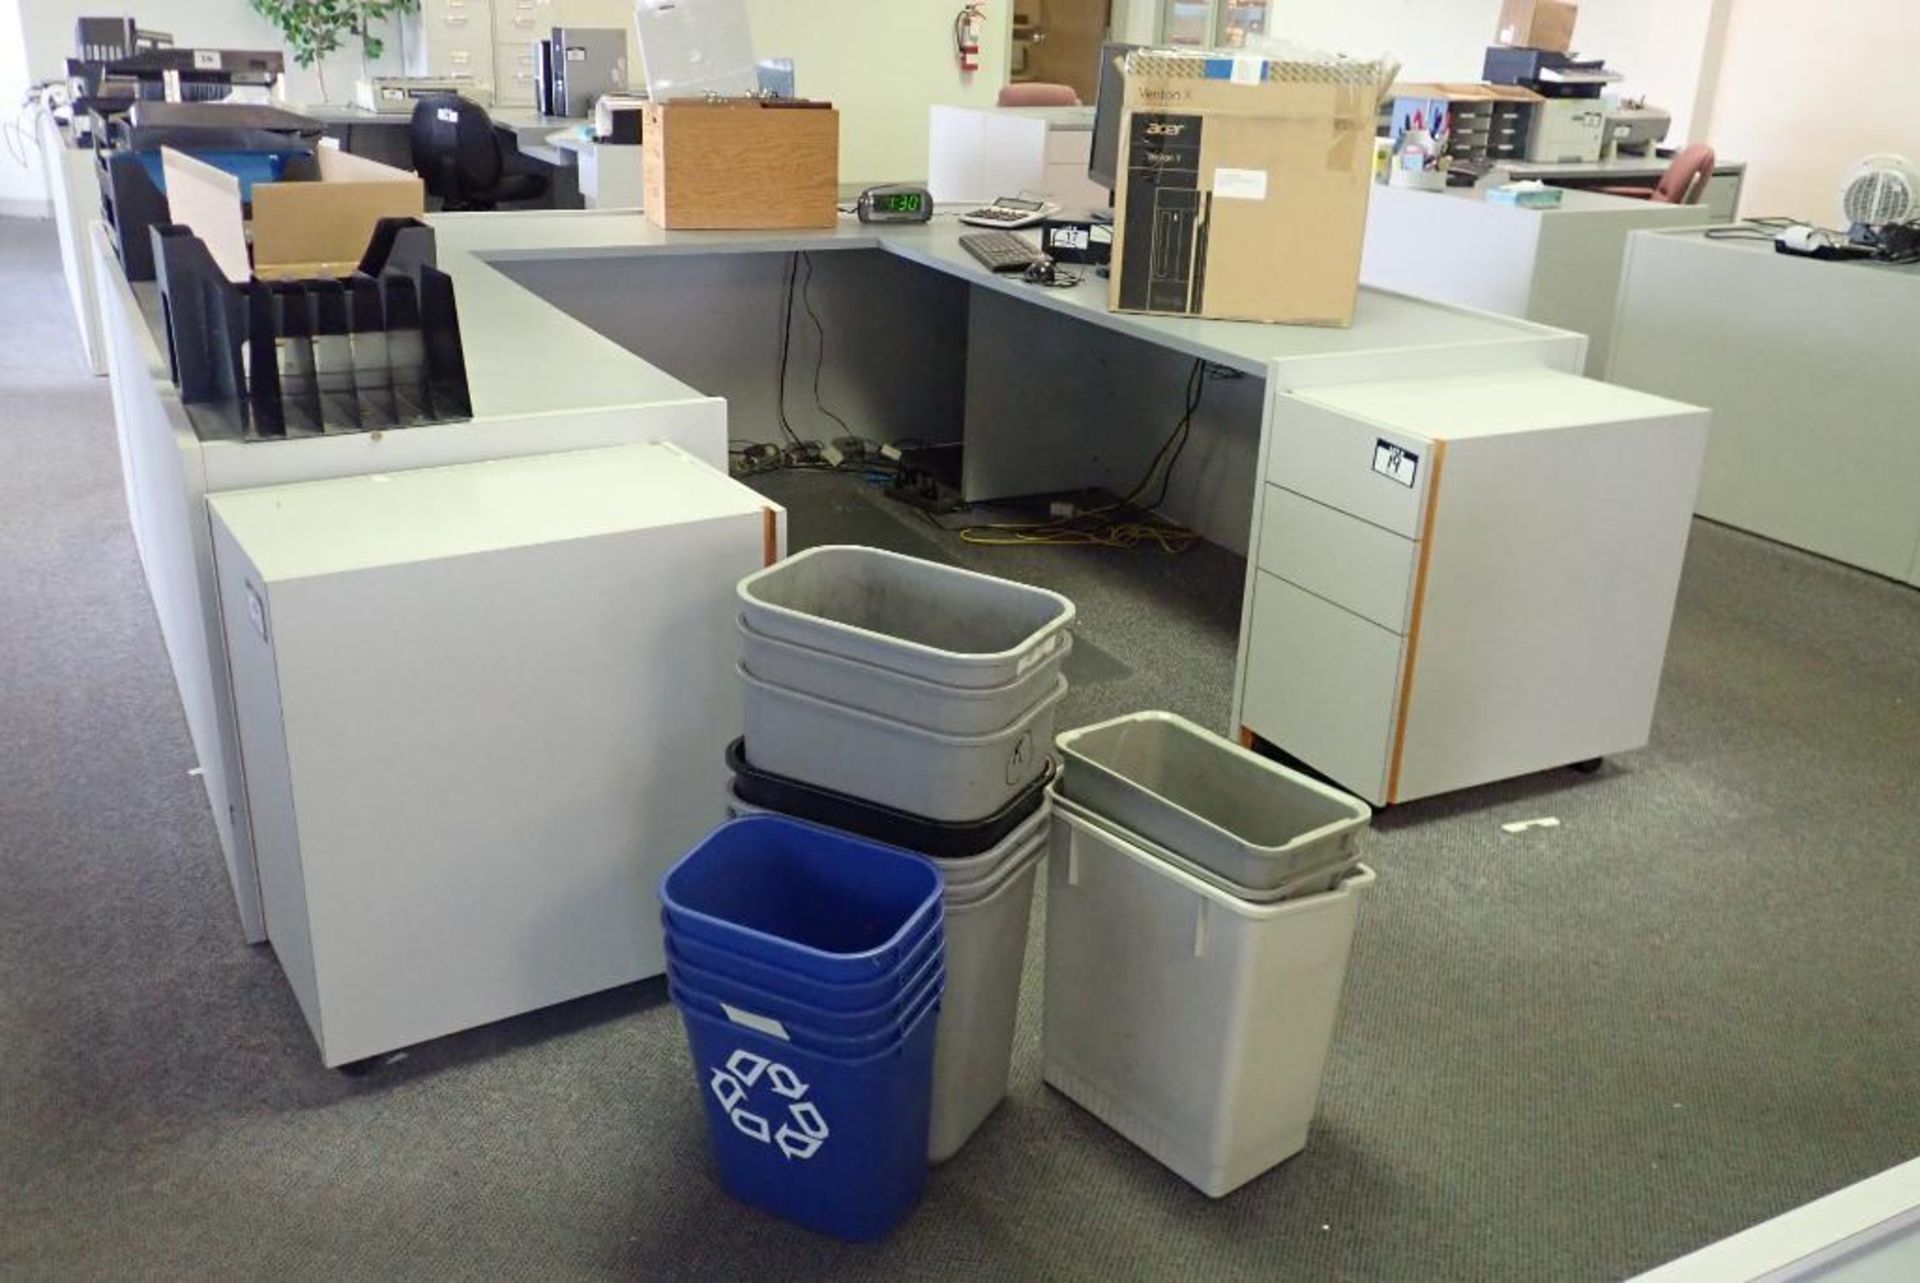 Lot of (3) Desks, (2) Steno Chairs, Vertical File Cabinet, Asst. Office Supplies, etc. - Image 2 of 3